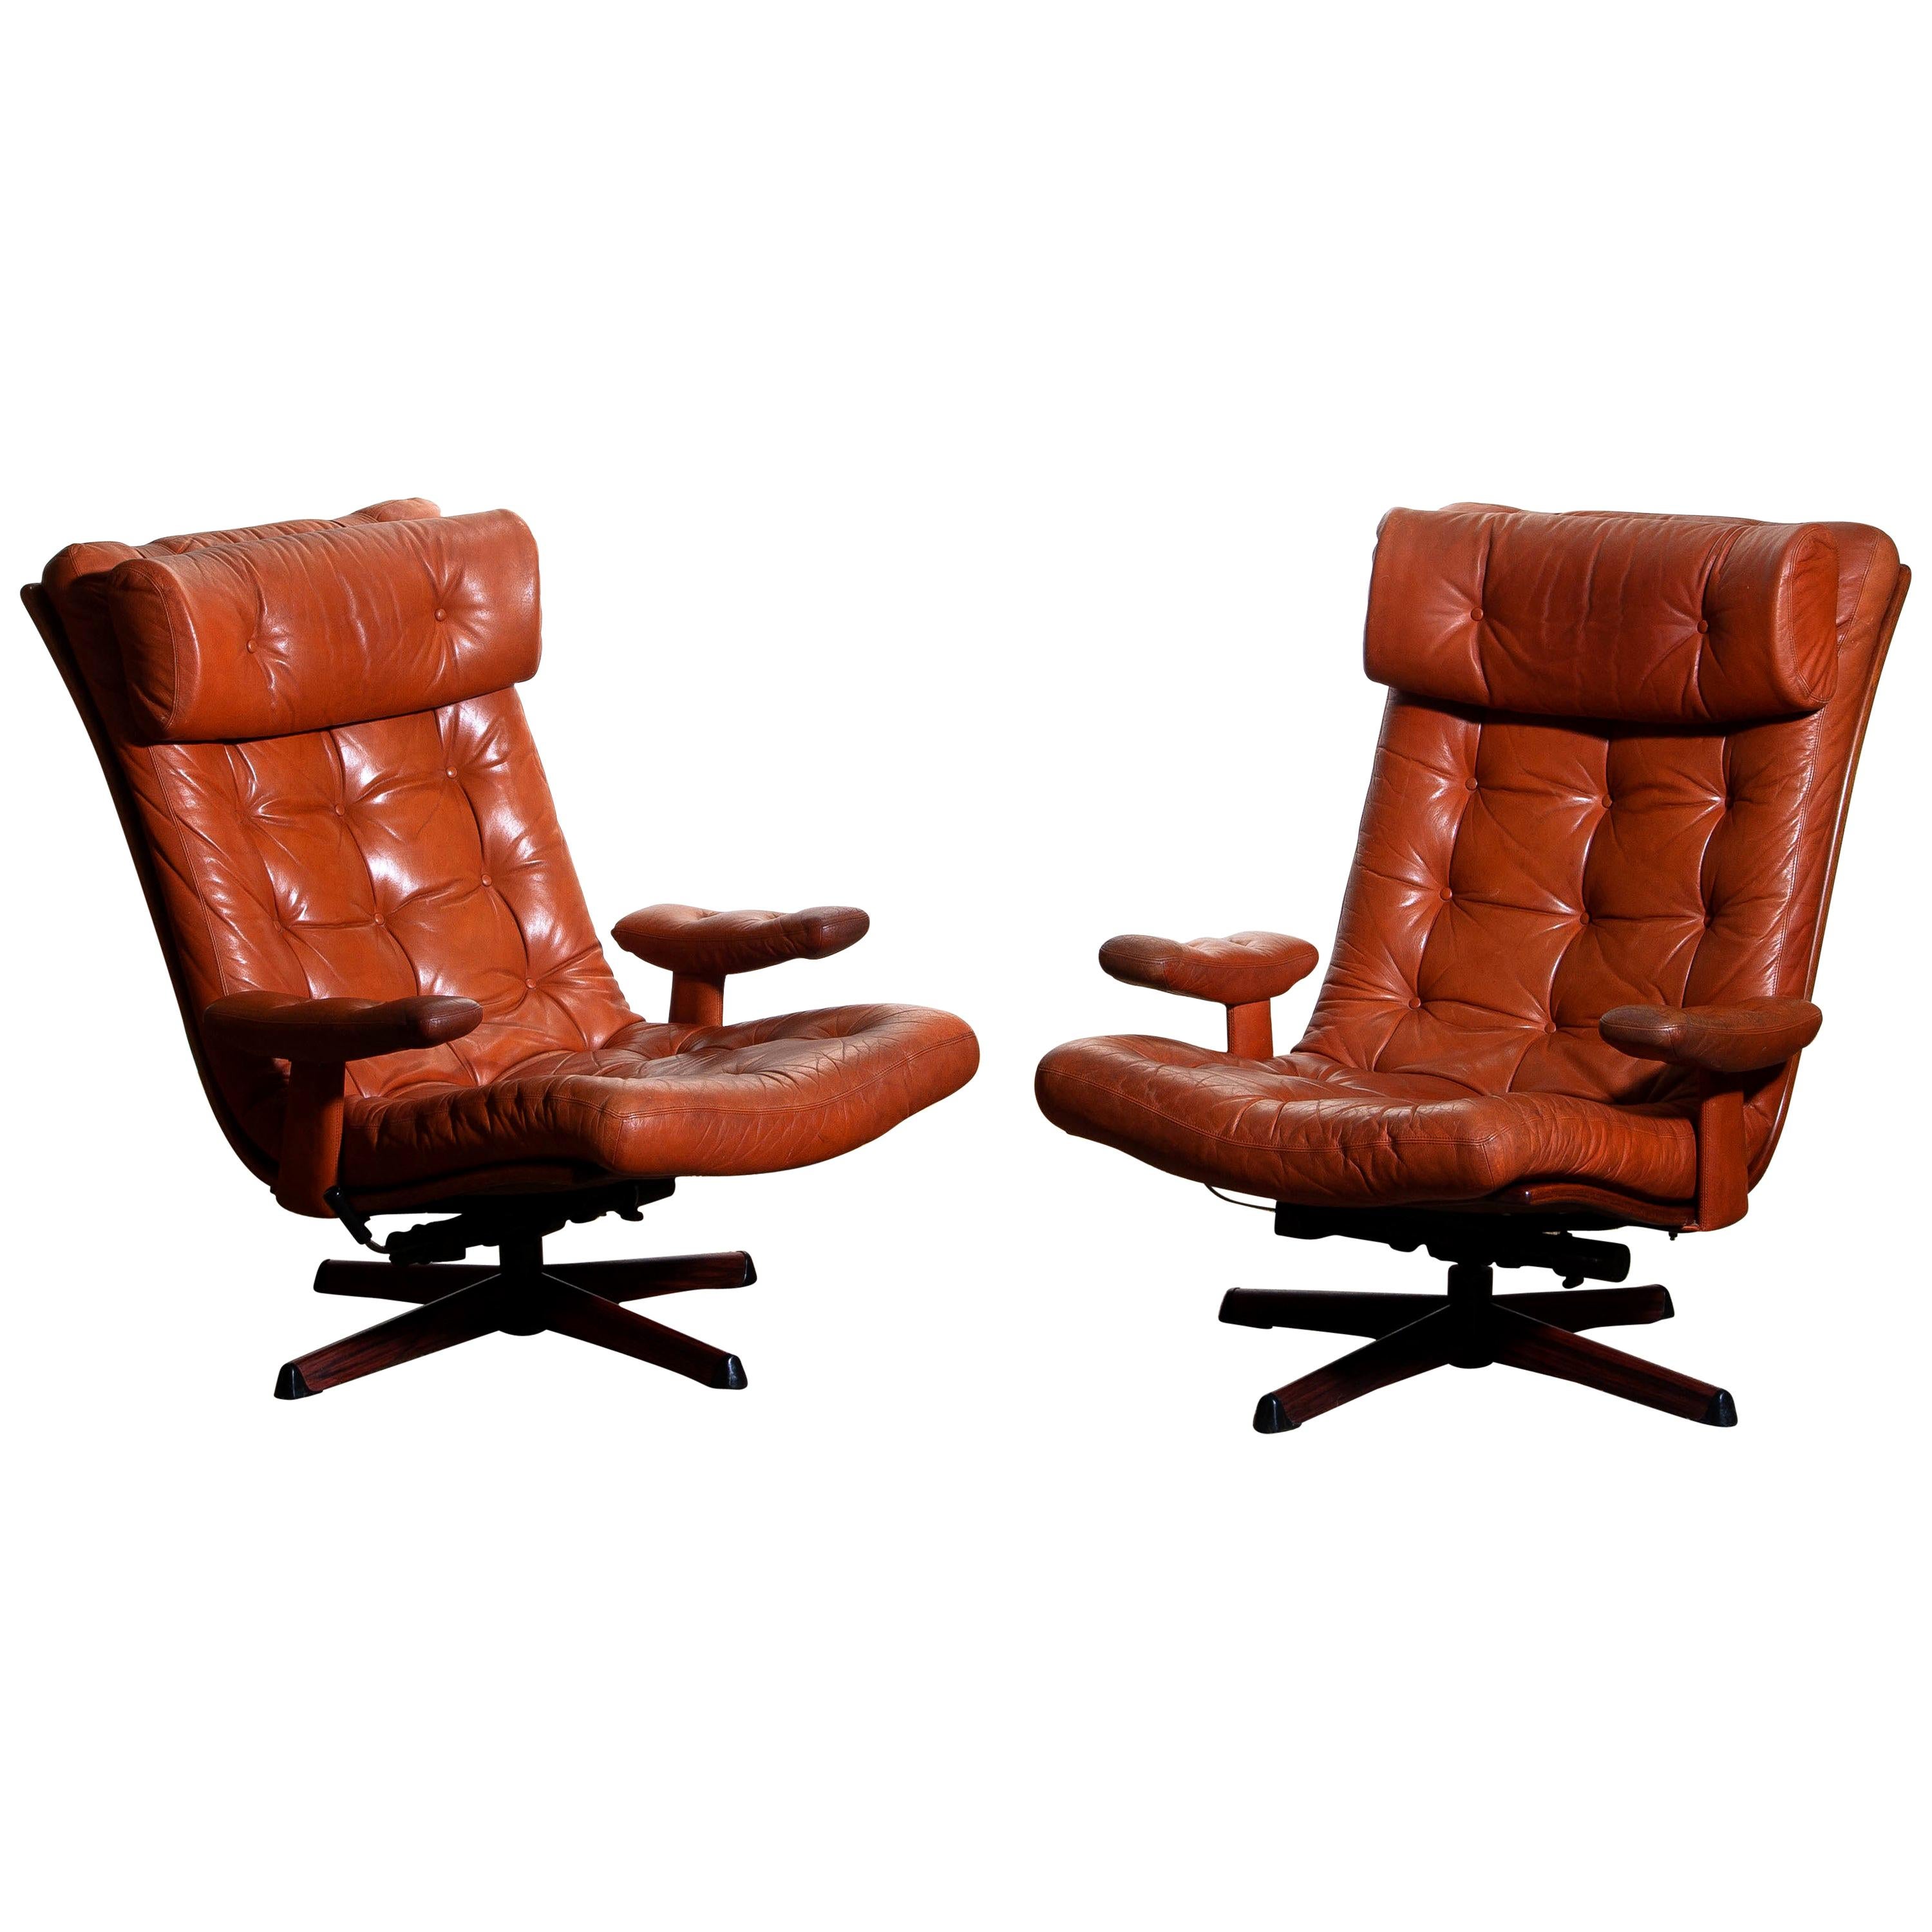 Pair of Cognac Leather Swivel / Relax Lounge Easy Chairs by Göte Design Nässjö